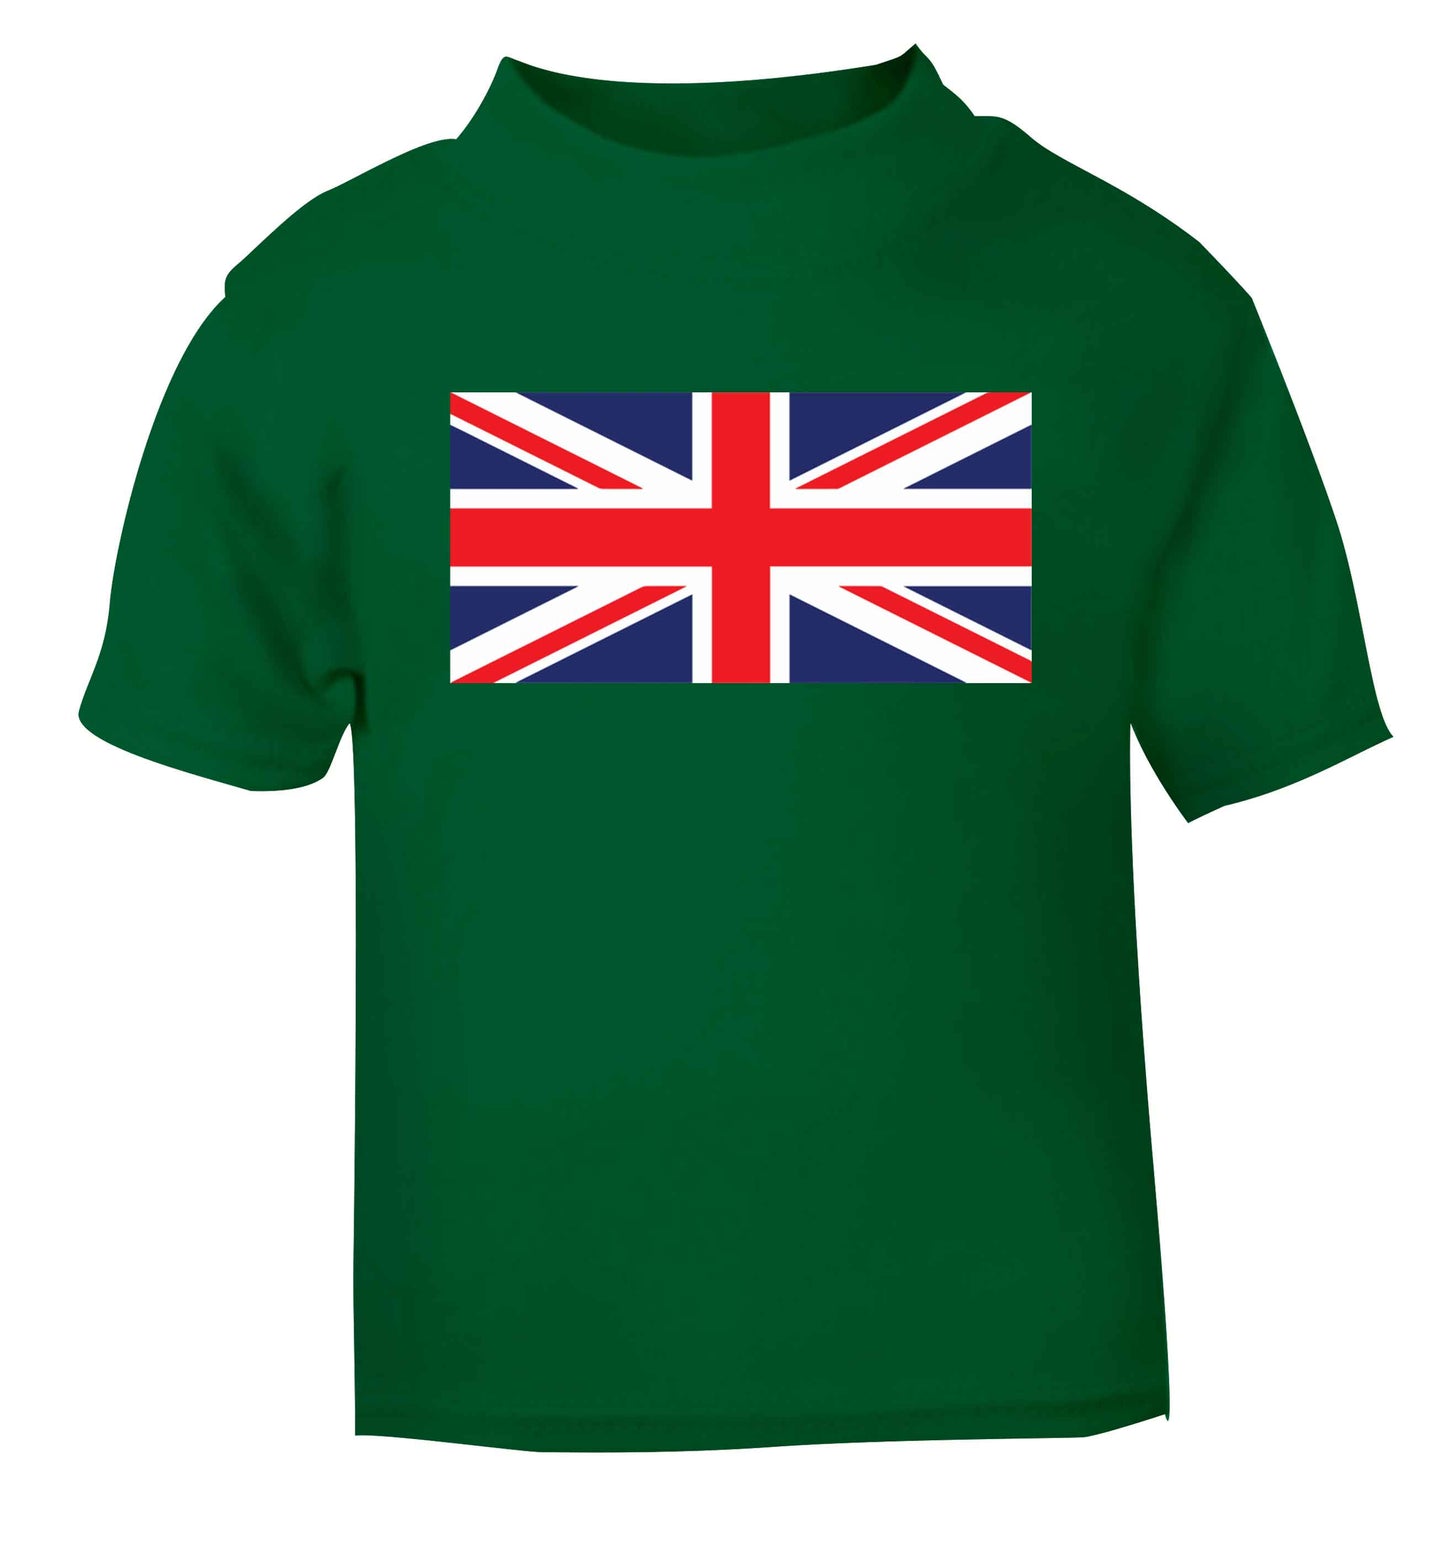 Union Jack green baby toddler Tshirt 2 Years